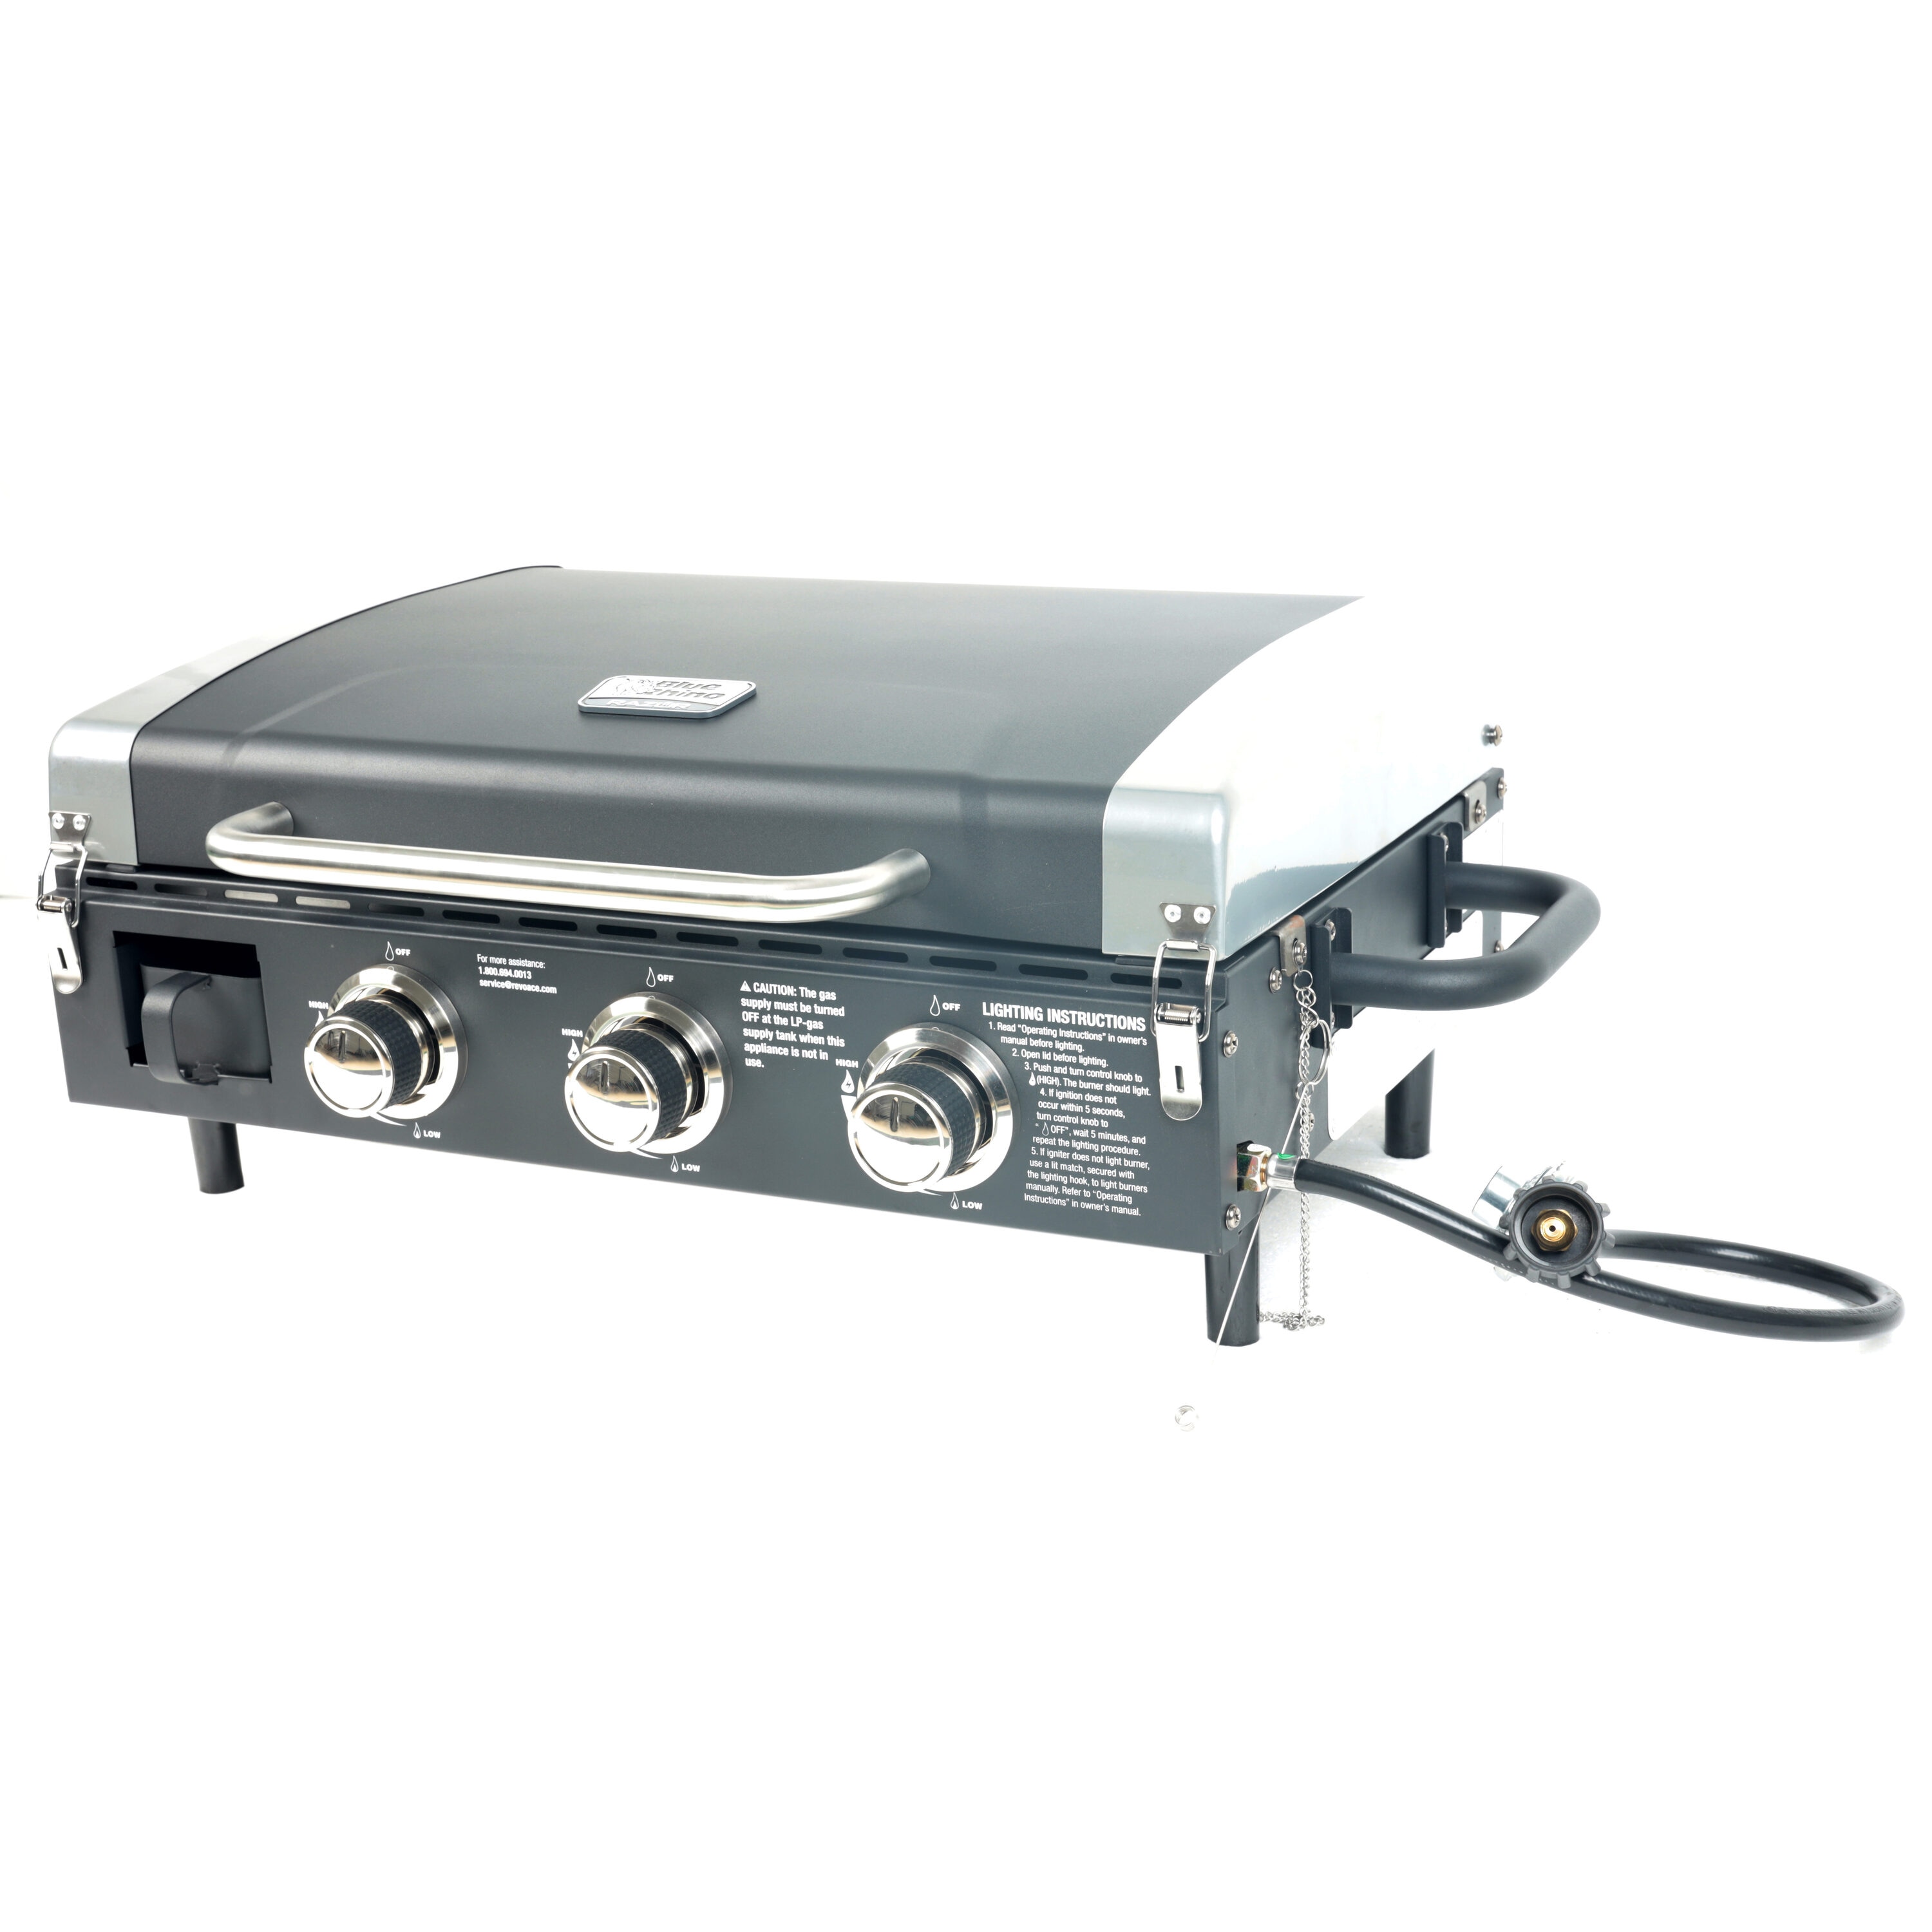 Electric Grill vs Gas Grill - Which is better? - Ideas by Mr Right